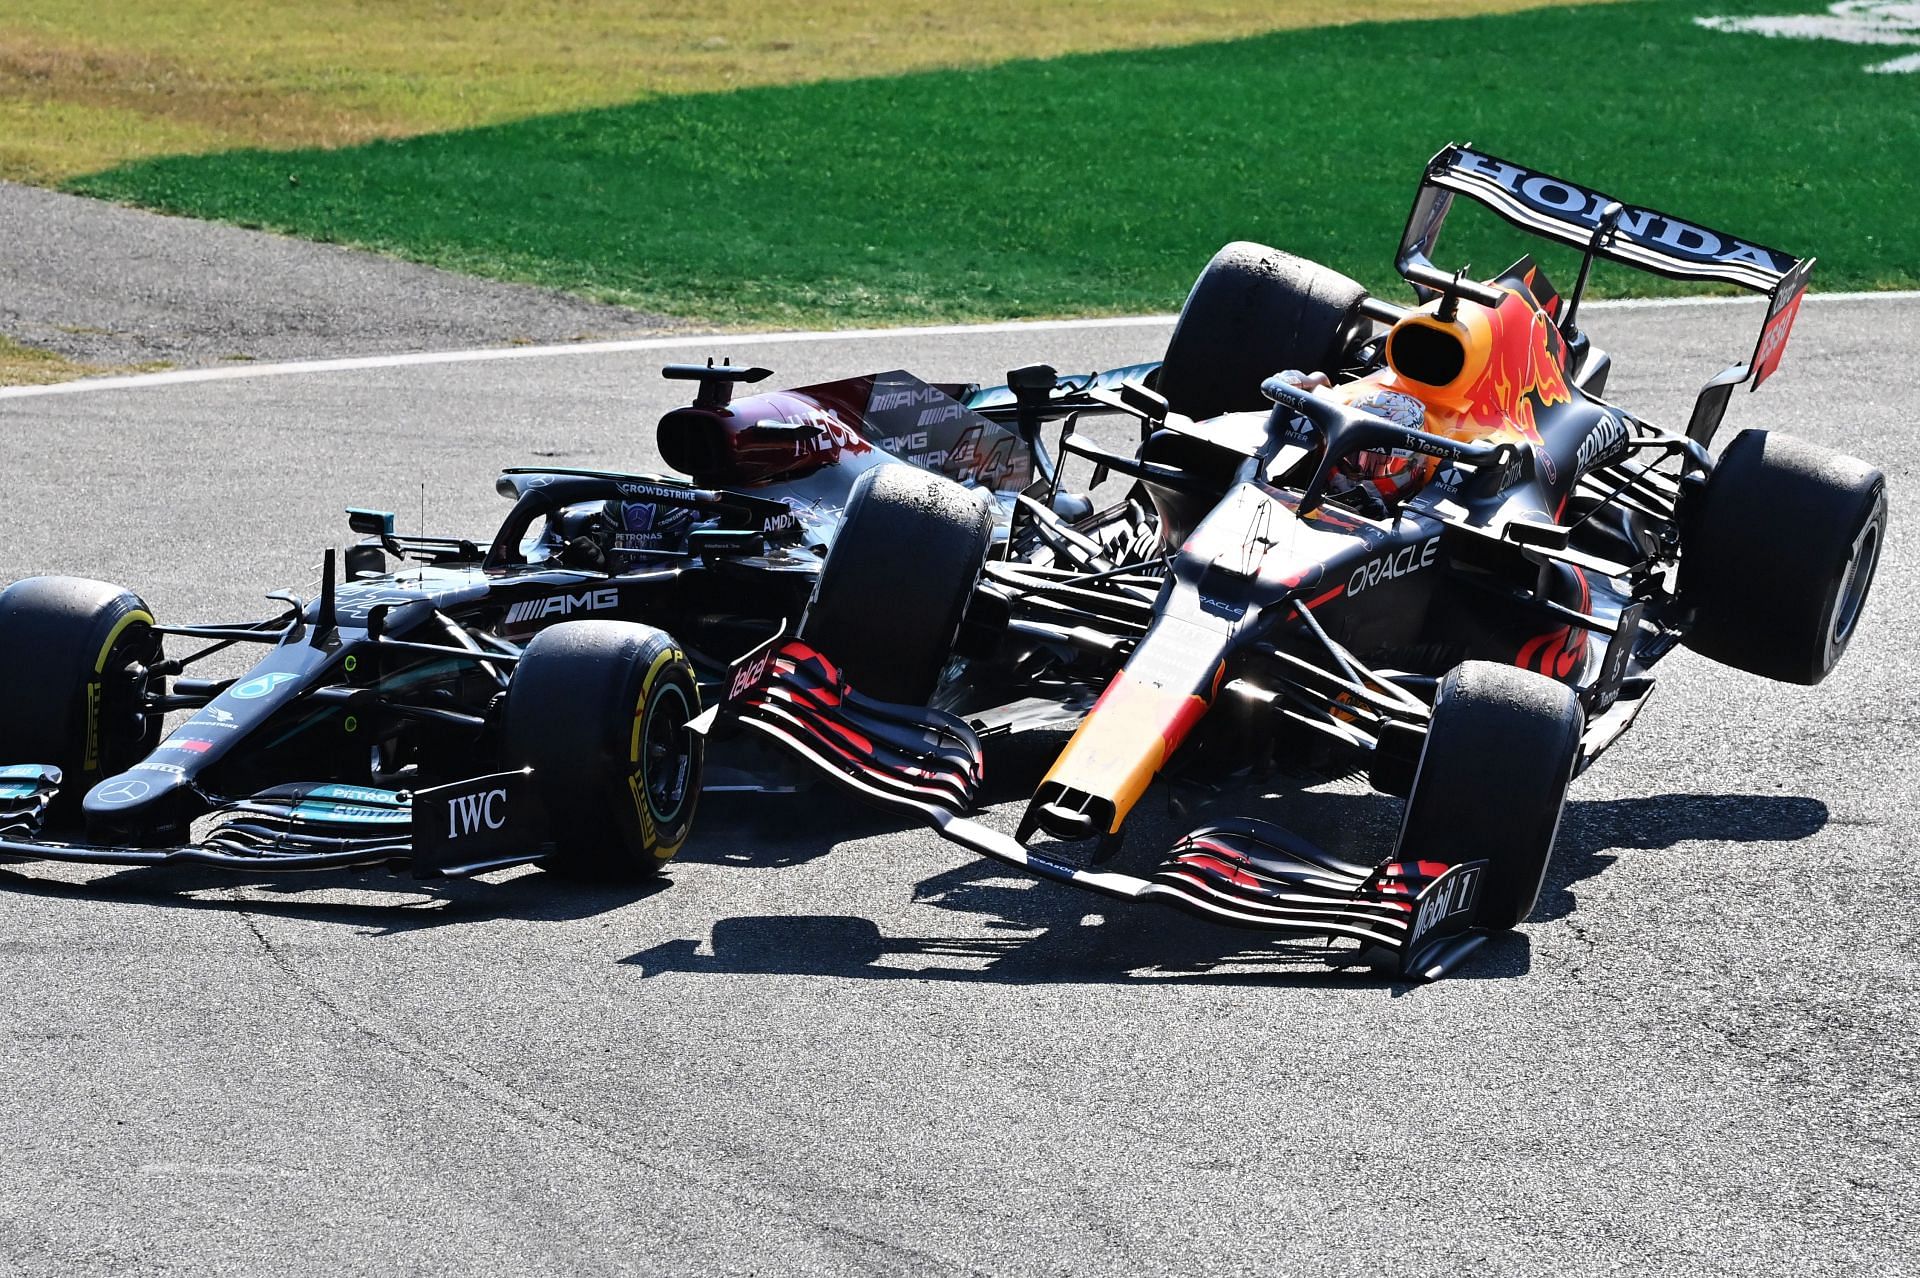 Max Verstappen and Lewis Hamilton collide at the 2021 Italian GP in Monza. (Photo by Peter Van Egmond/Getty Images)